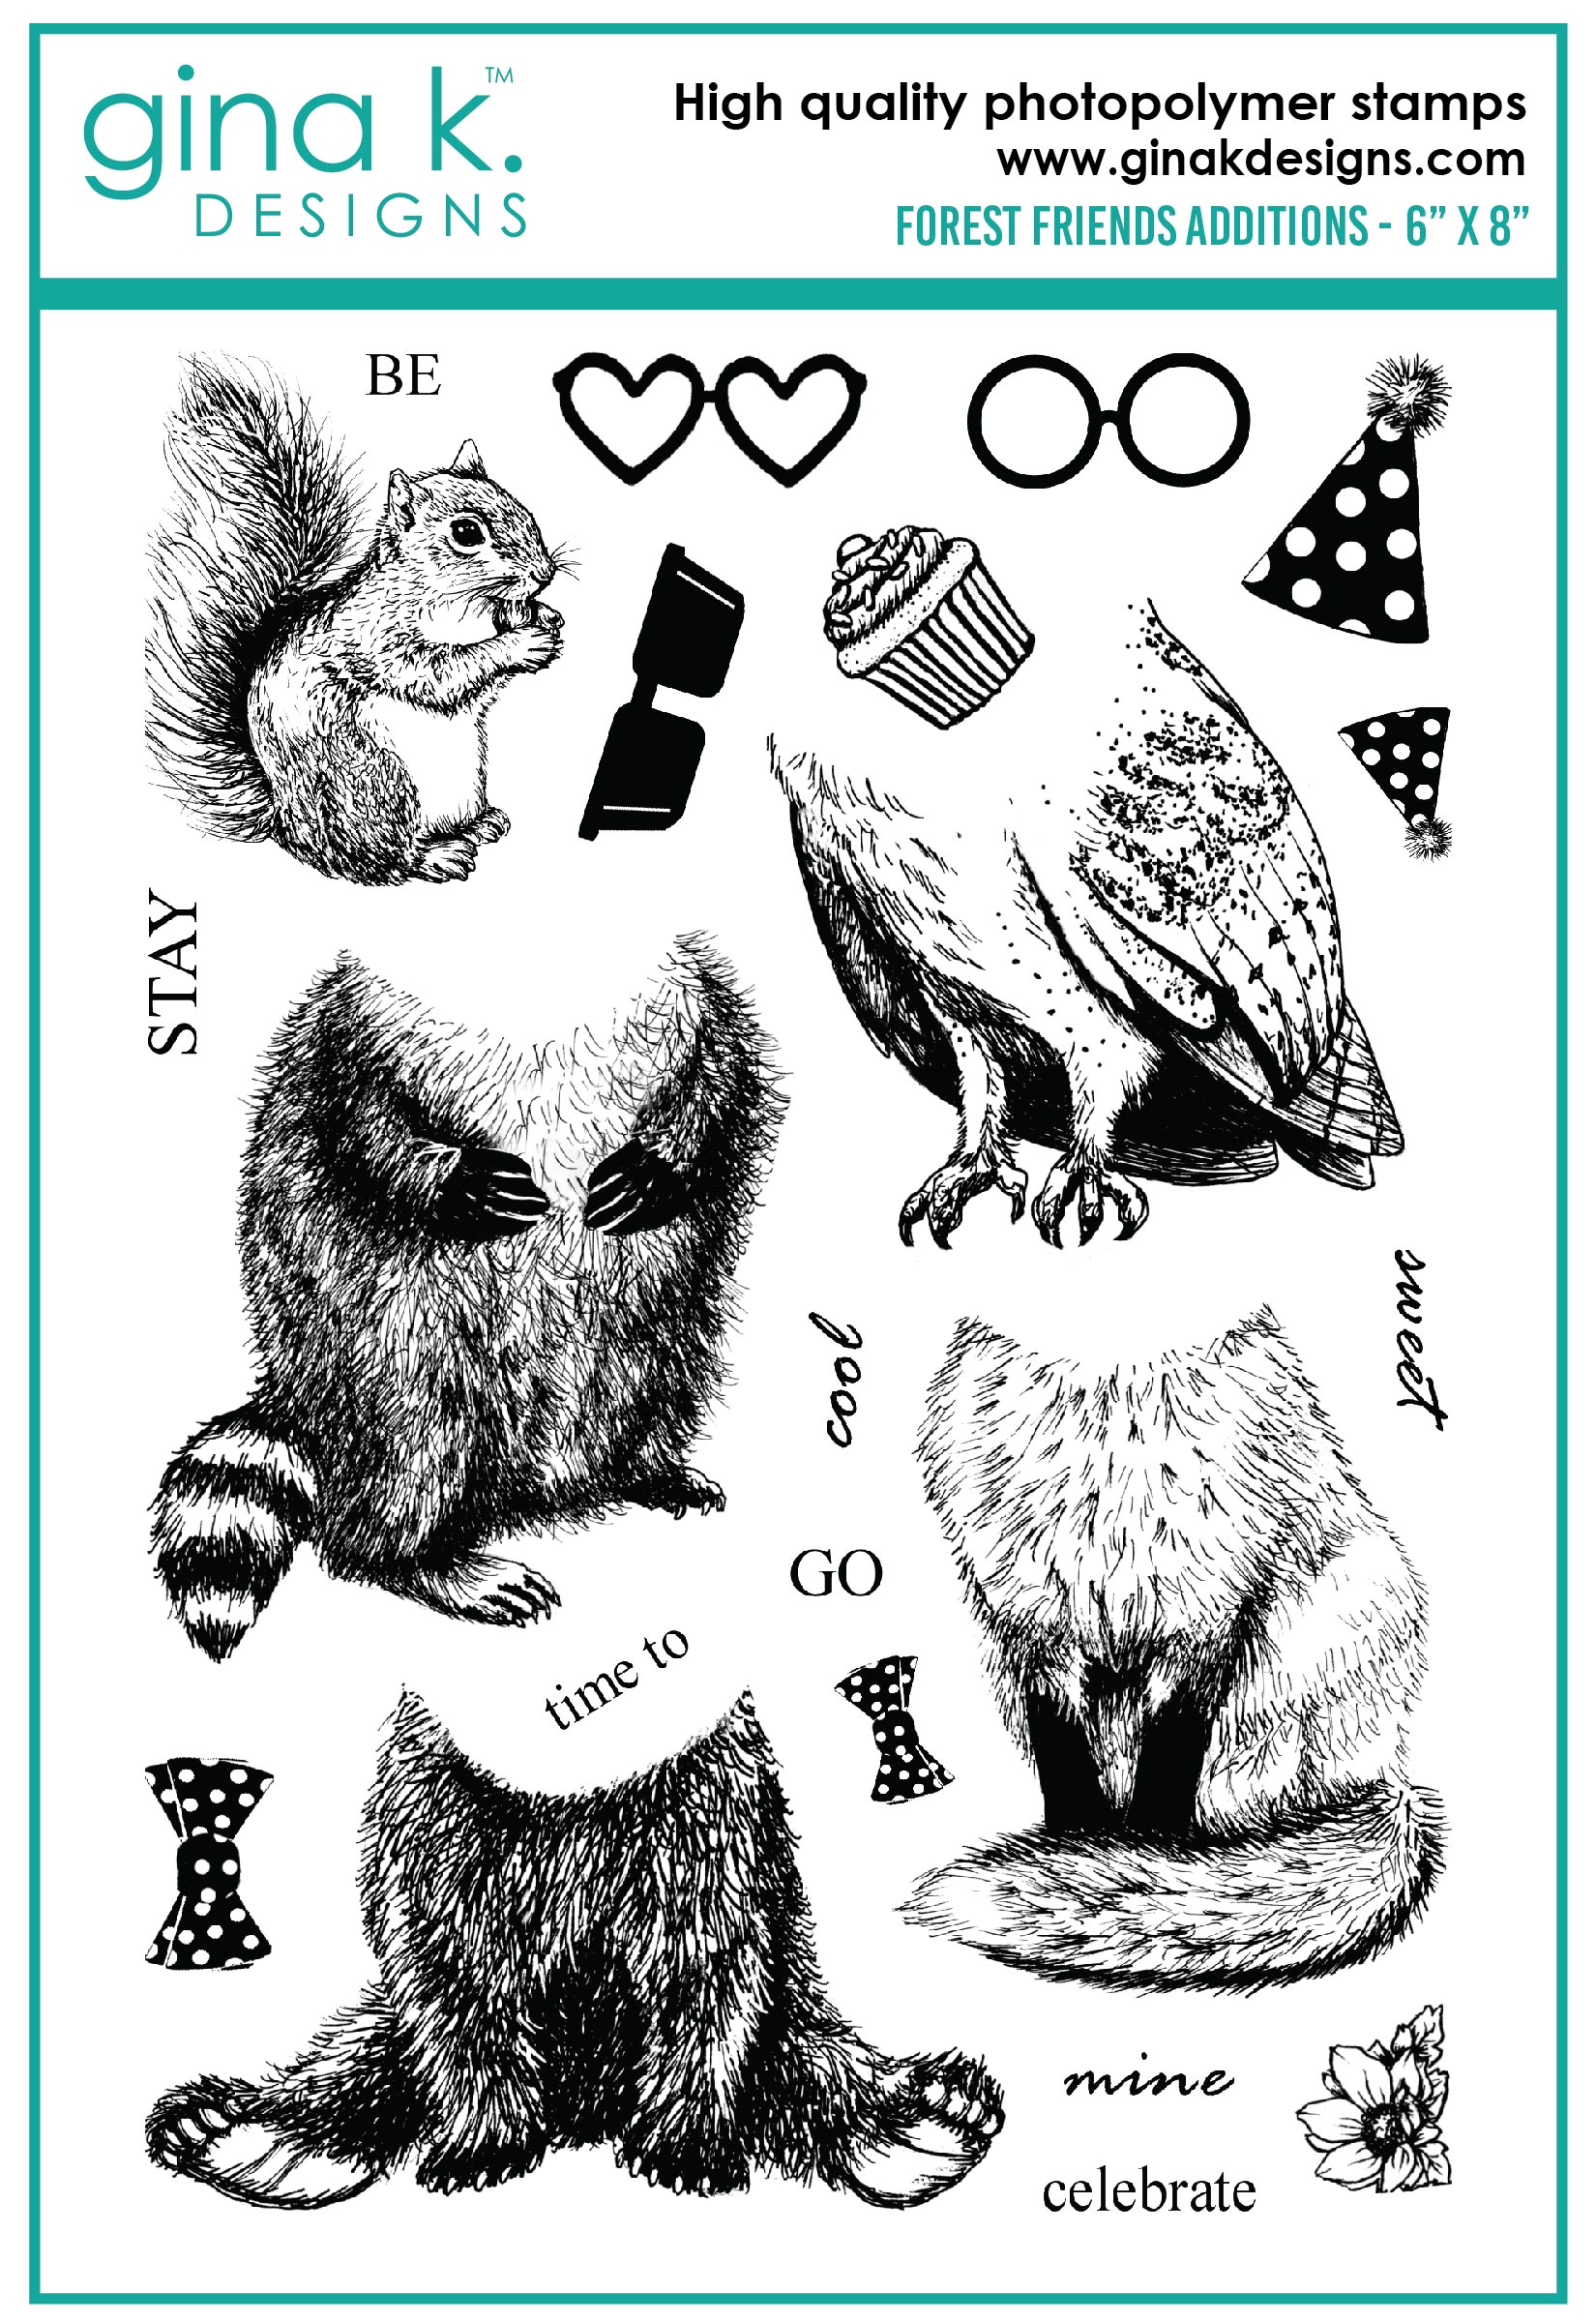 forest-friends-additions-stamp-for-web-01